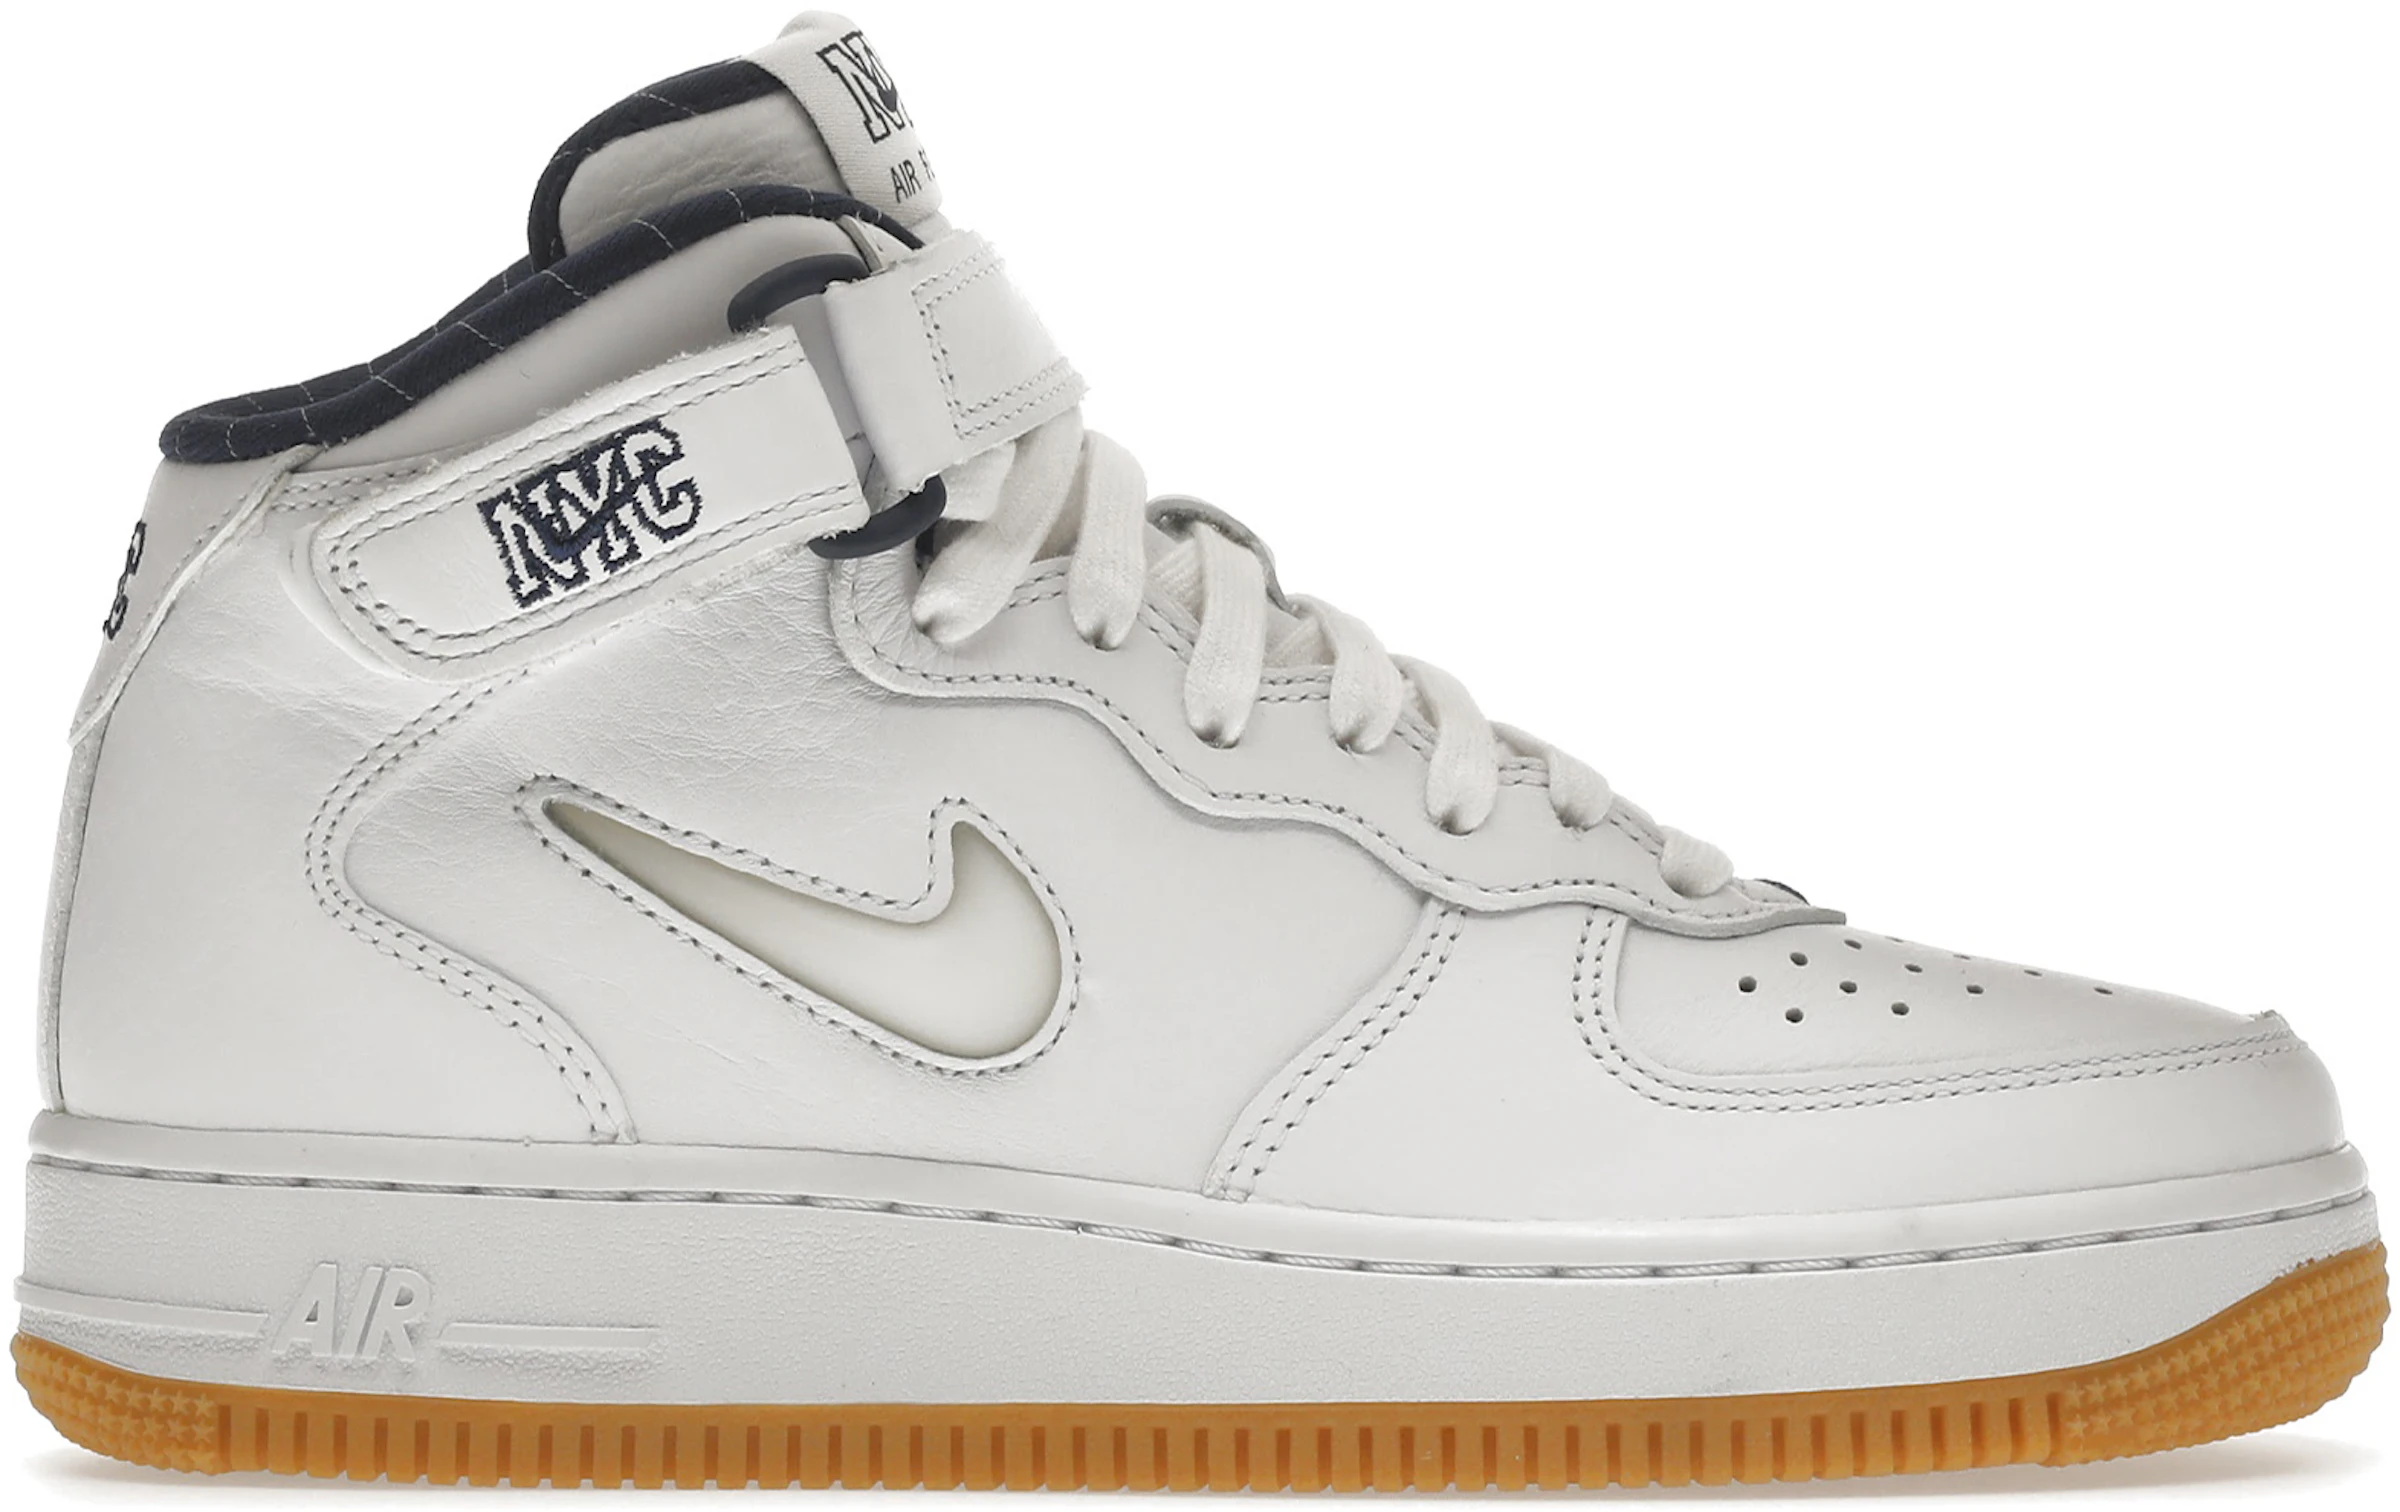 Nike Air Force 1 Mid QS Jewel NYC White Navy DH5622-100 - US